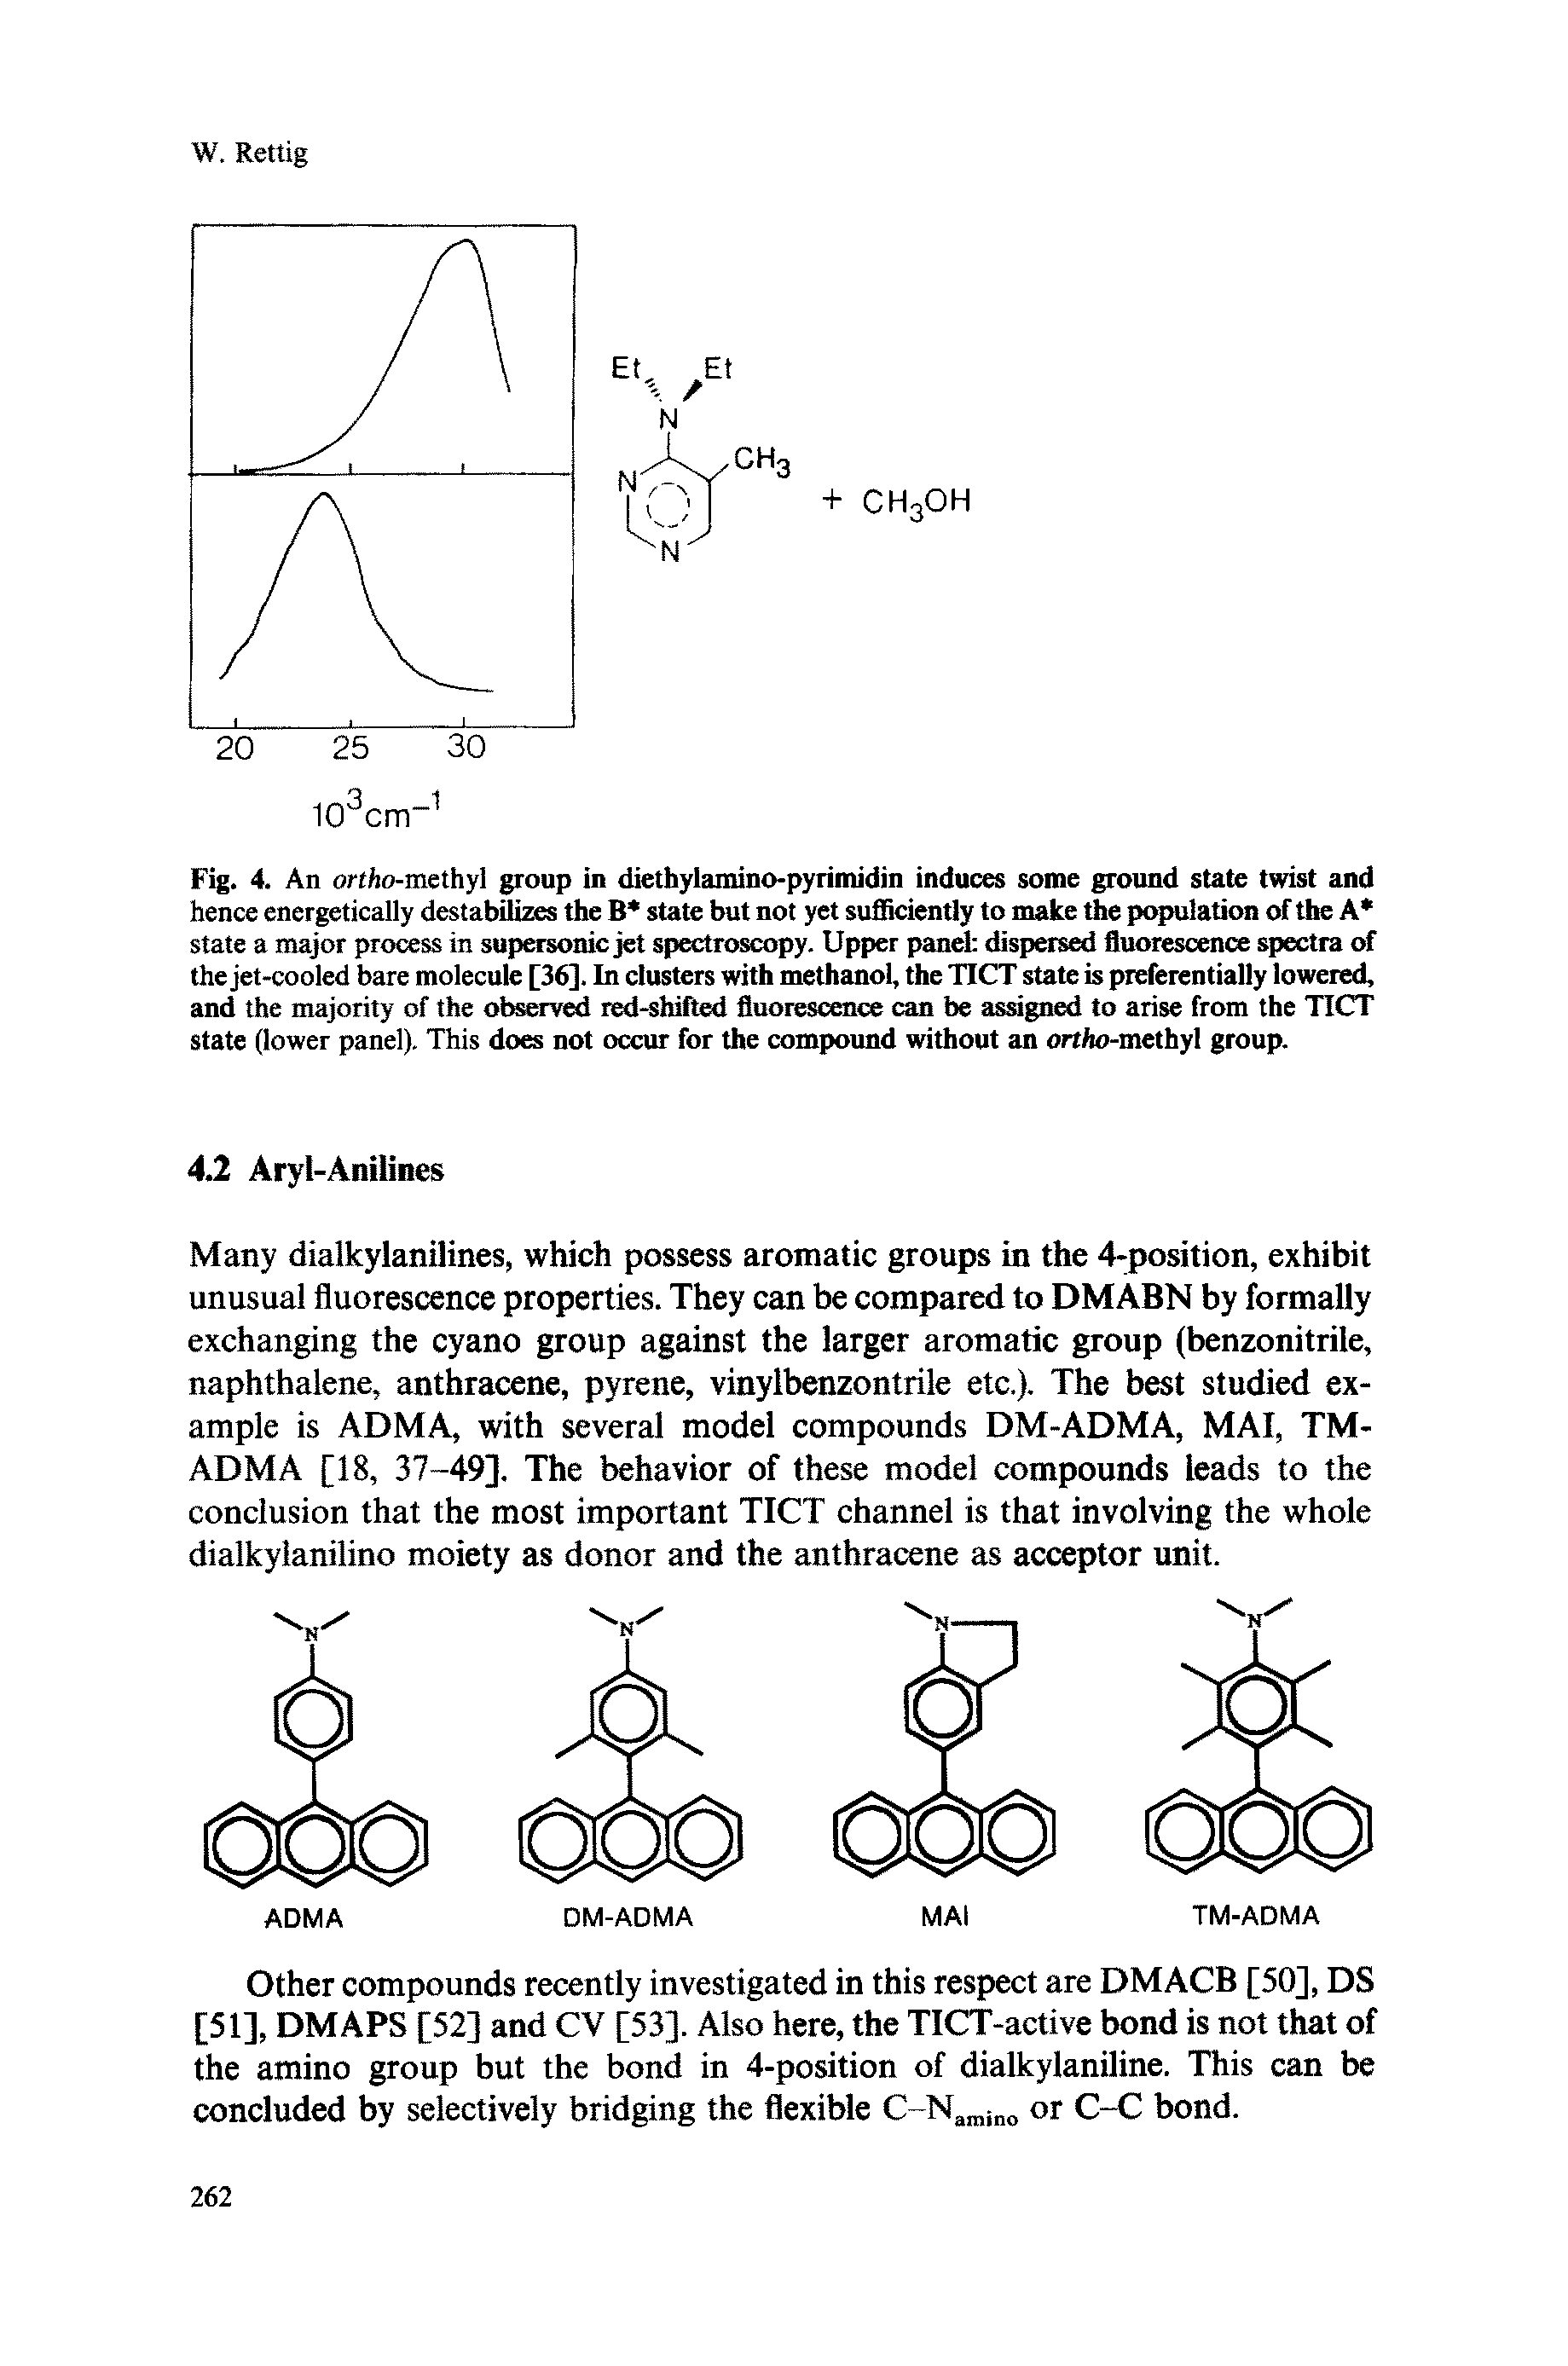 Fig. 4. An ortho-methyl group in diethylamino-pyrimidin induces some ground state twist and hence energetically destabilizes the B state but not yet sufficiently to make the population of the A state a najor process in supersonic jet spectroscopy. Upper panel dispersed fluorescence spectra of the jet-cooled bare molecule [36]. In clusters with methanol, the TICT state is preferentially lowered, and the majority of the ob rved red-shifted fluorescence can be assign l to arise from the TICT state (lower panel). This does not occur for the compound without an ortho-methyl group.